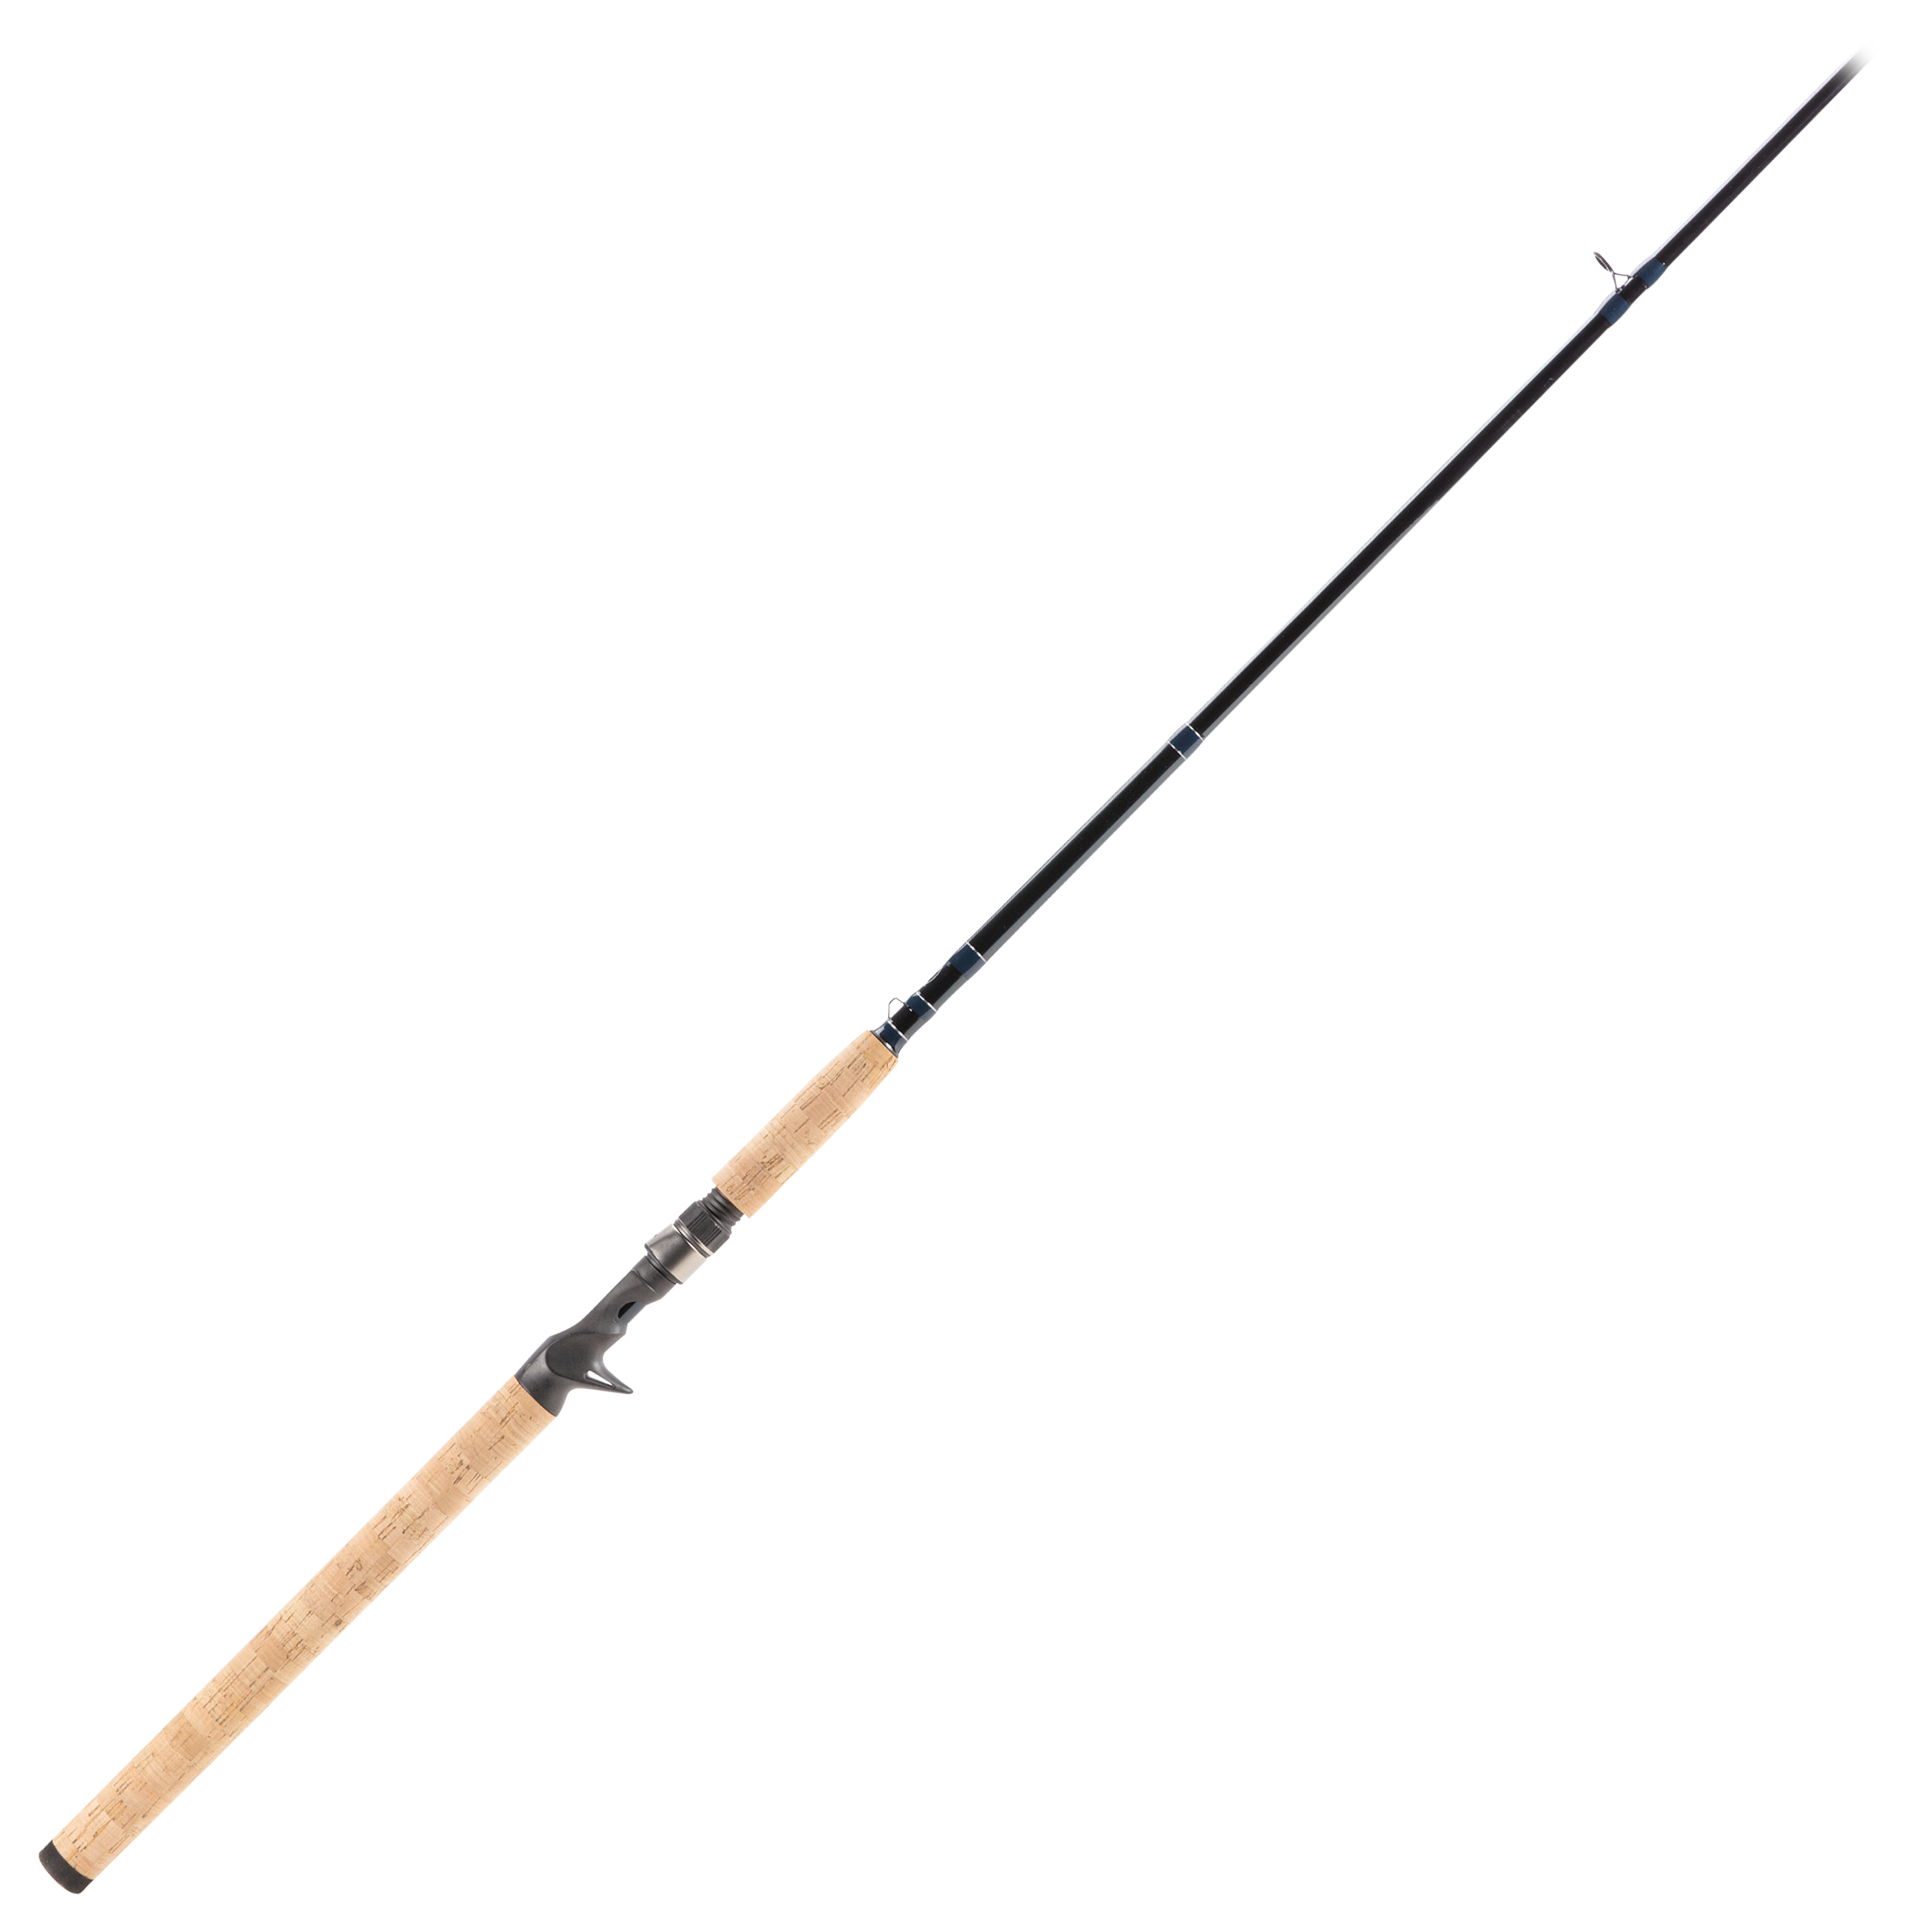 Bass Pro Shops Graphite Series Muskie Casting Rod - 7' - X Heavy